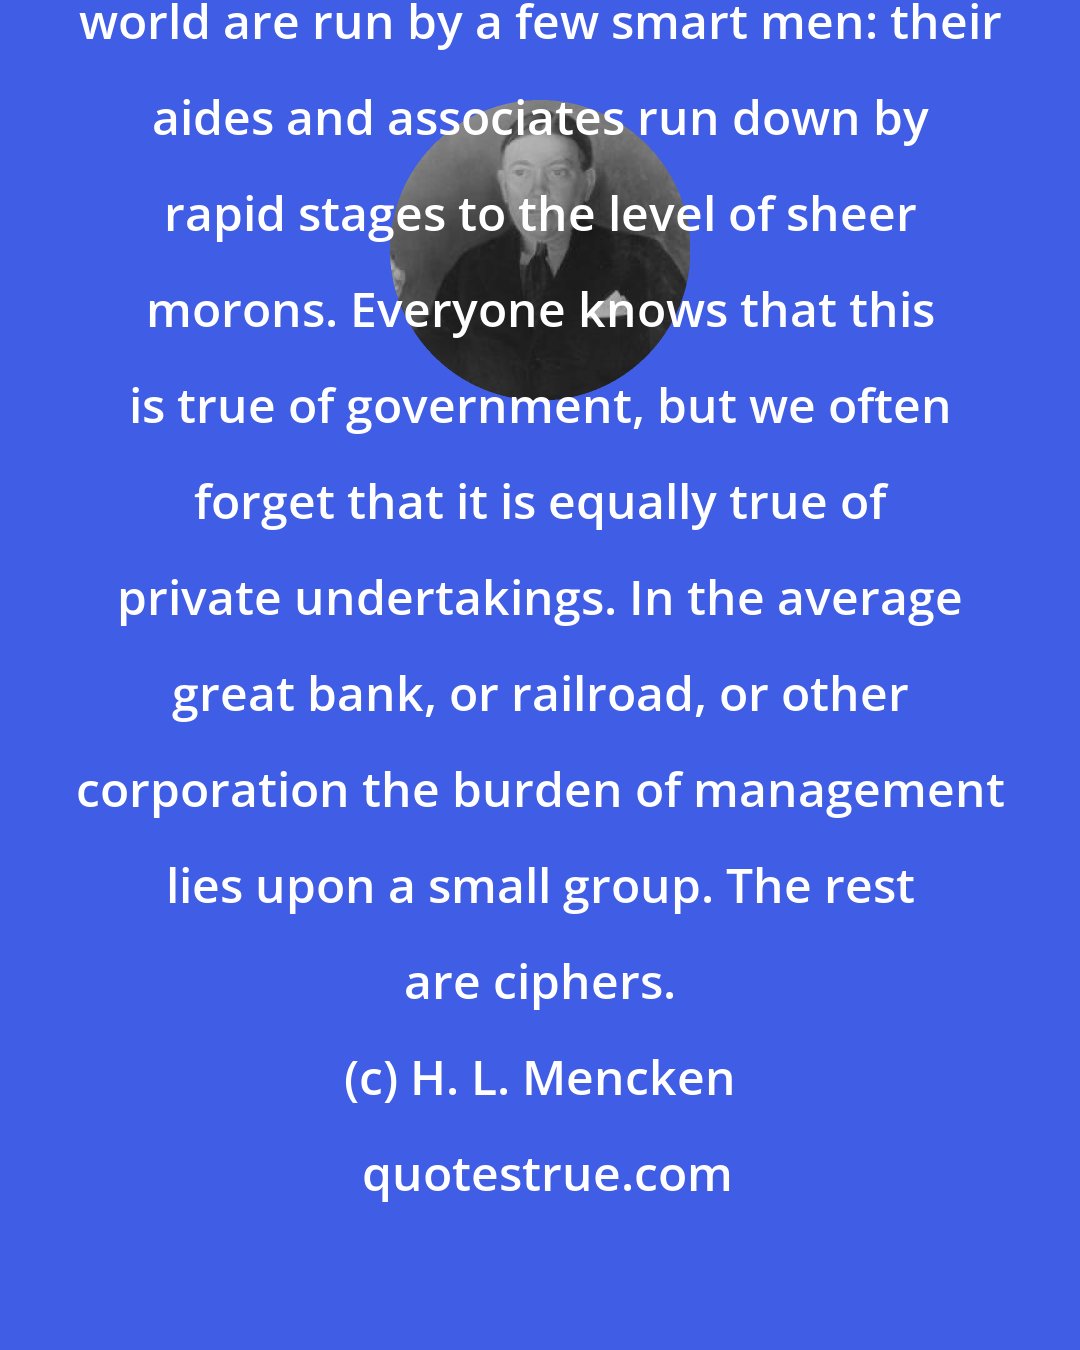 H. L. Mencken: All the great enterprises of the world are run by a few smart men: their aides and associates run down by rapid stages to the level of sheer morons. Everyone knows that this is true of government, but we often forget that it is equally true of private undertakings. In the average great bank, or railroad, or other corporation the burden of management lies upon a small group. The rest are ciphers.